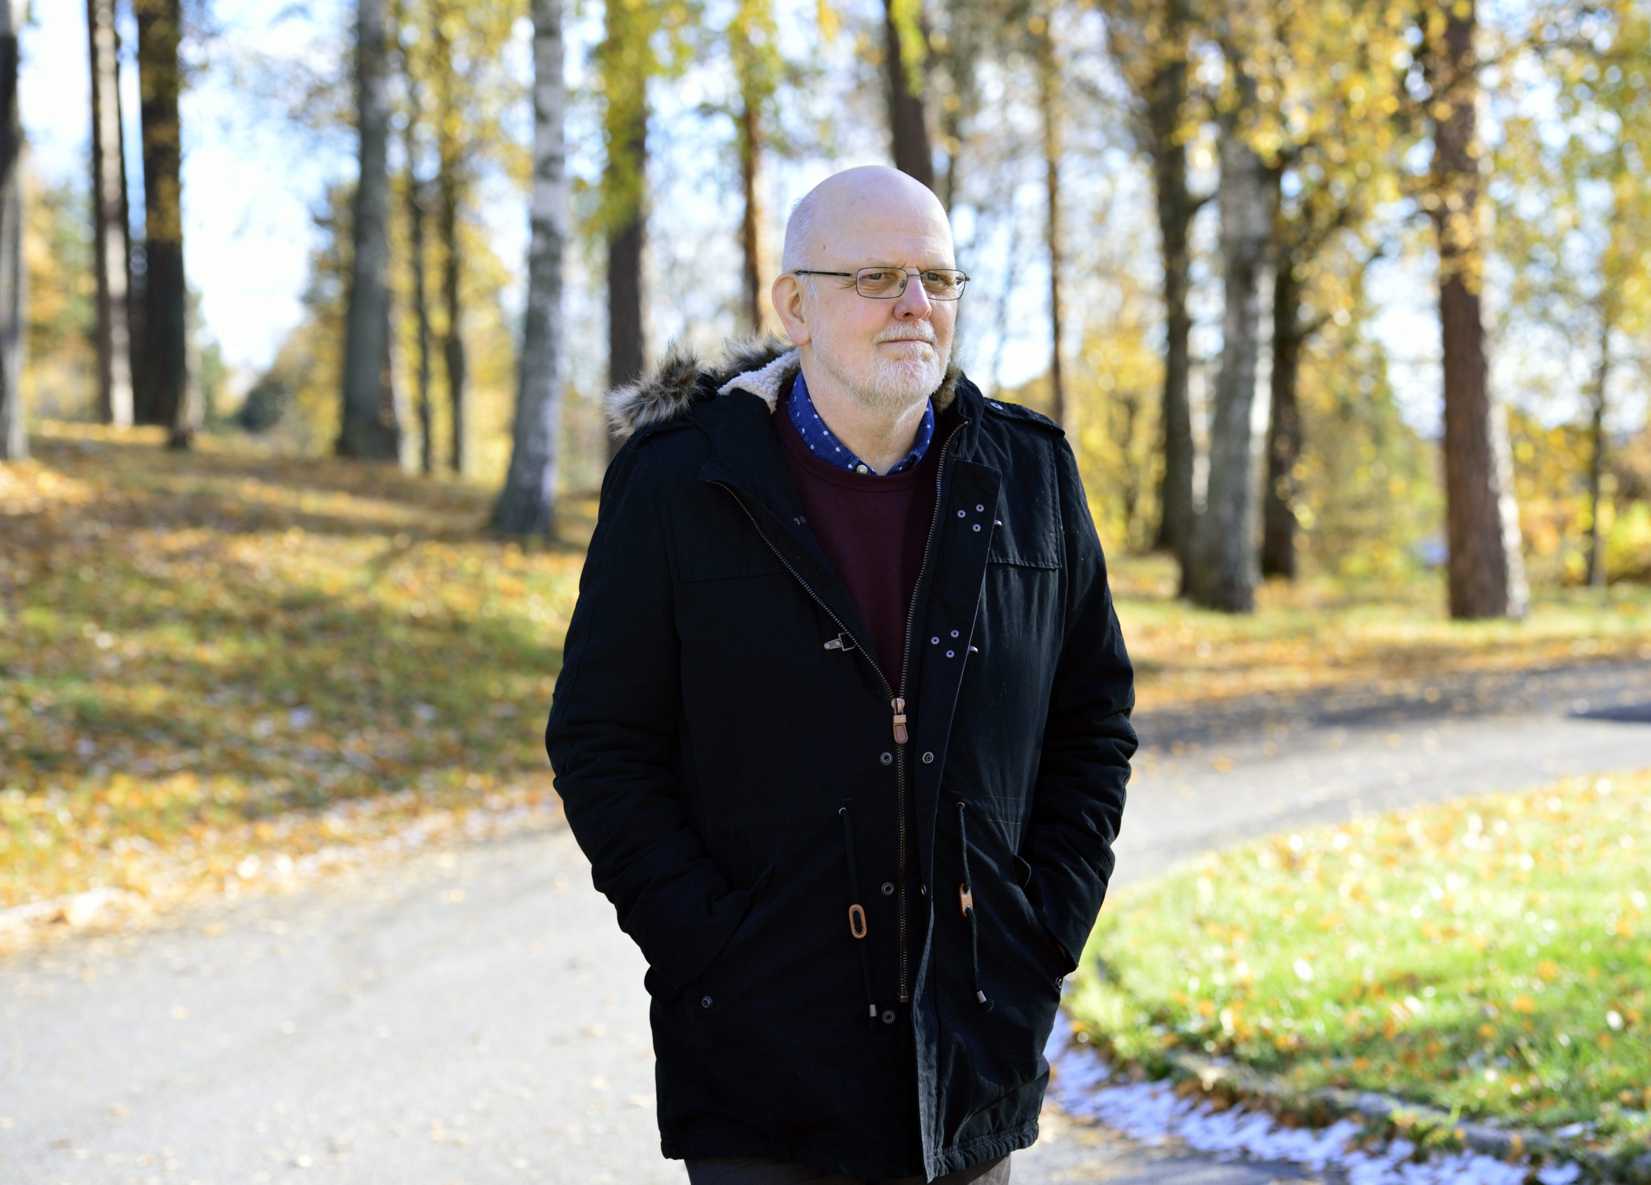 This picture taken on October 21, 2013 in Falun shows Sture Bergwall, a Swedish man long considered Scandinavia's most notorious serial killer. (Henrik Montgomery—AFT/Getty Images)